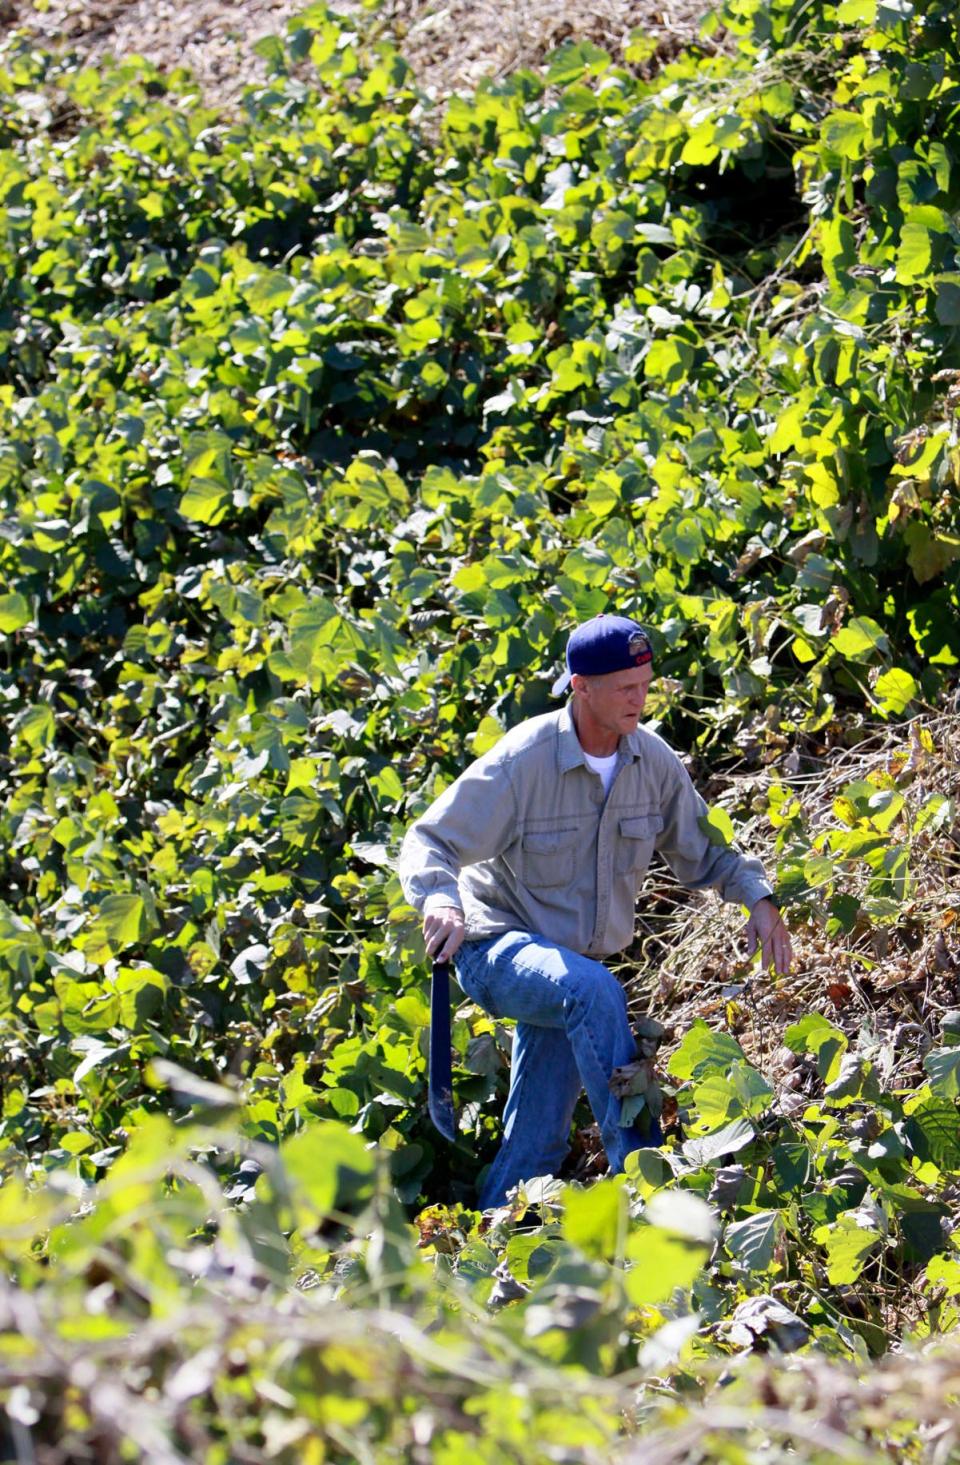 A Lee County man searches for the missing Shaniya Davis at the intersection of NC 87 and  Walker Road in Lee County on Nov. 16, 2009.